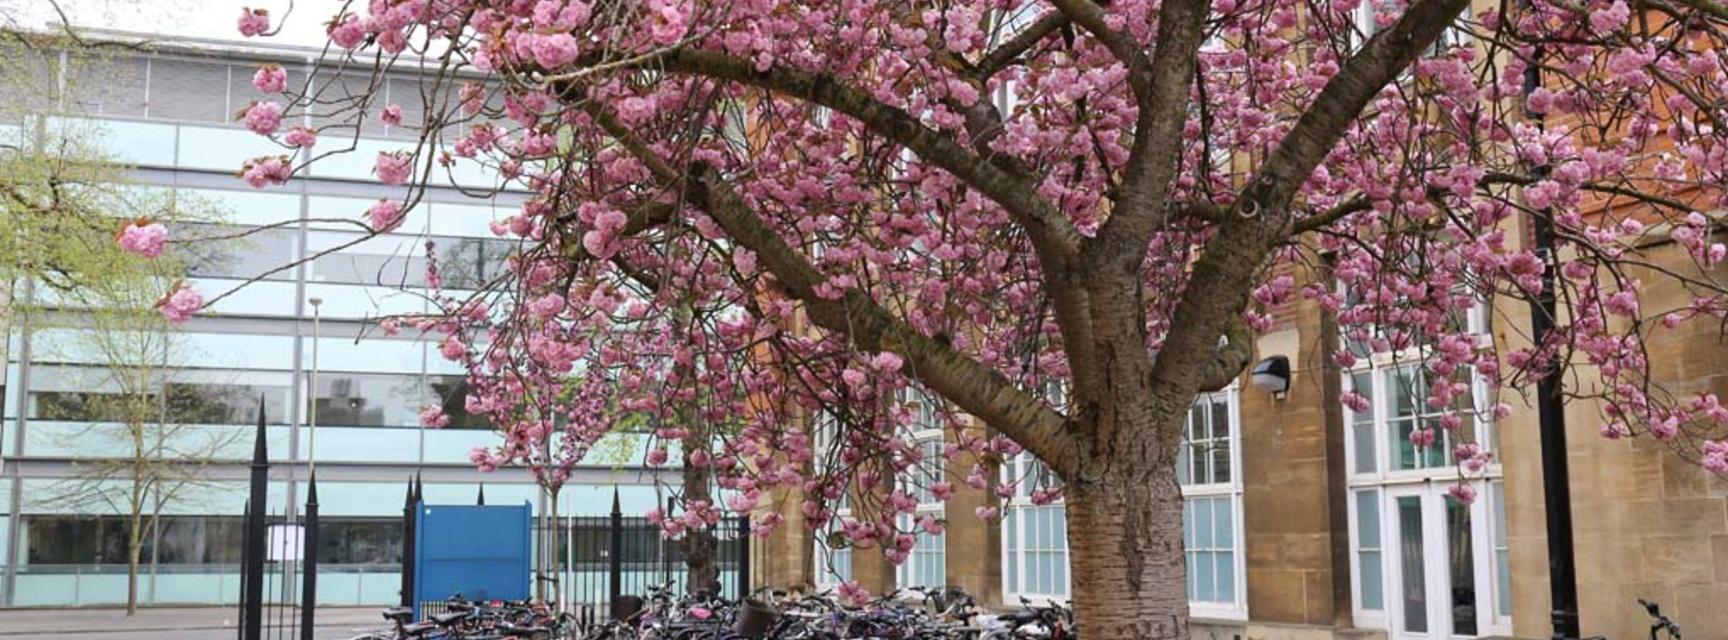 Photo of may blossom outside the Dyson Perrins Building with Chemistry Teaching Lab in background